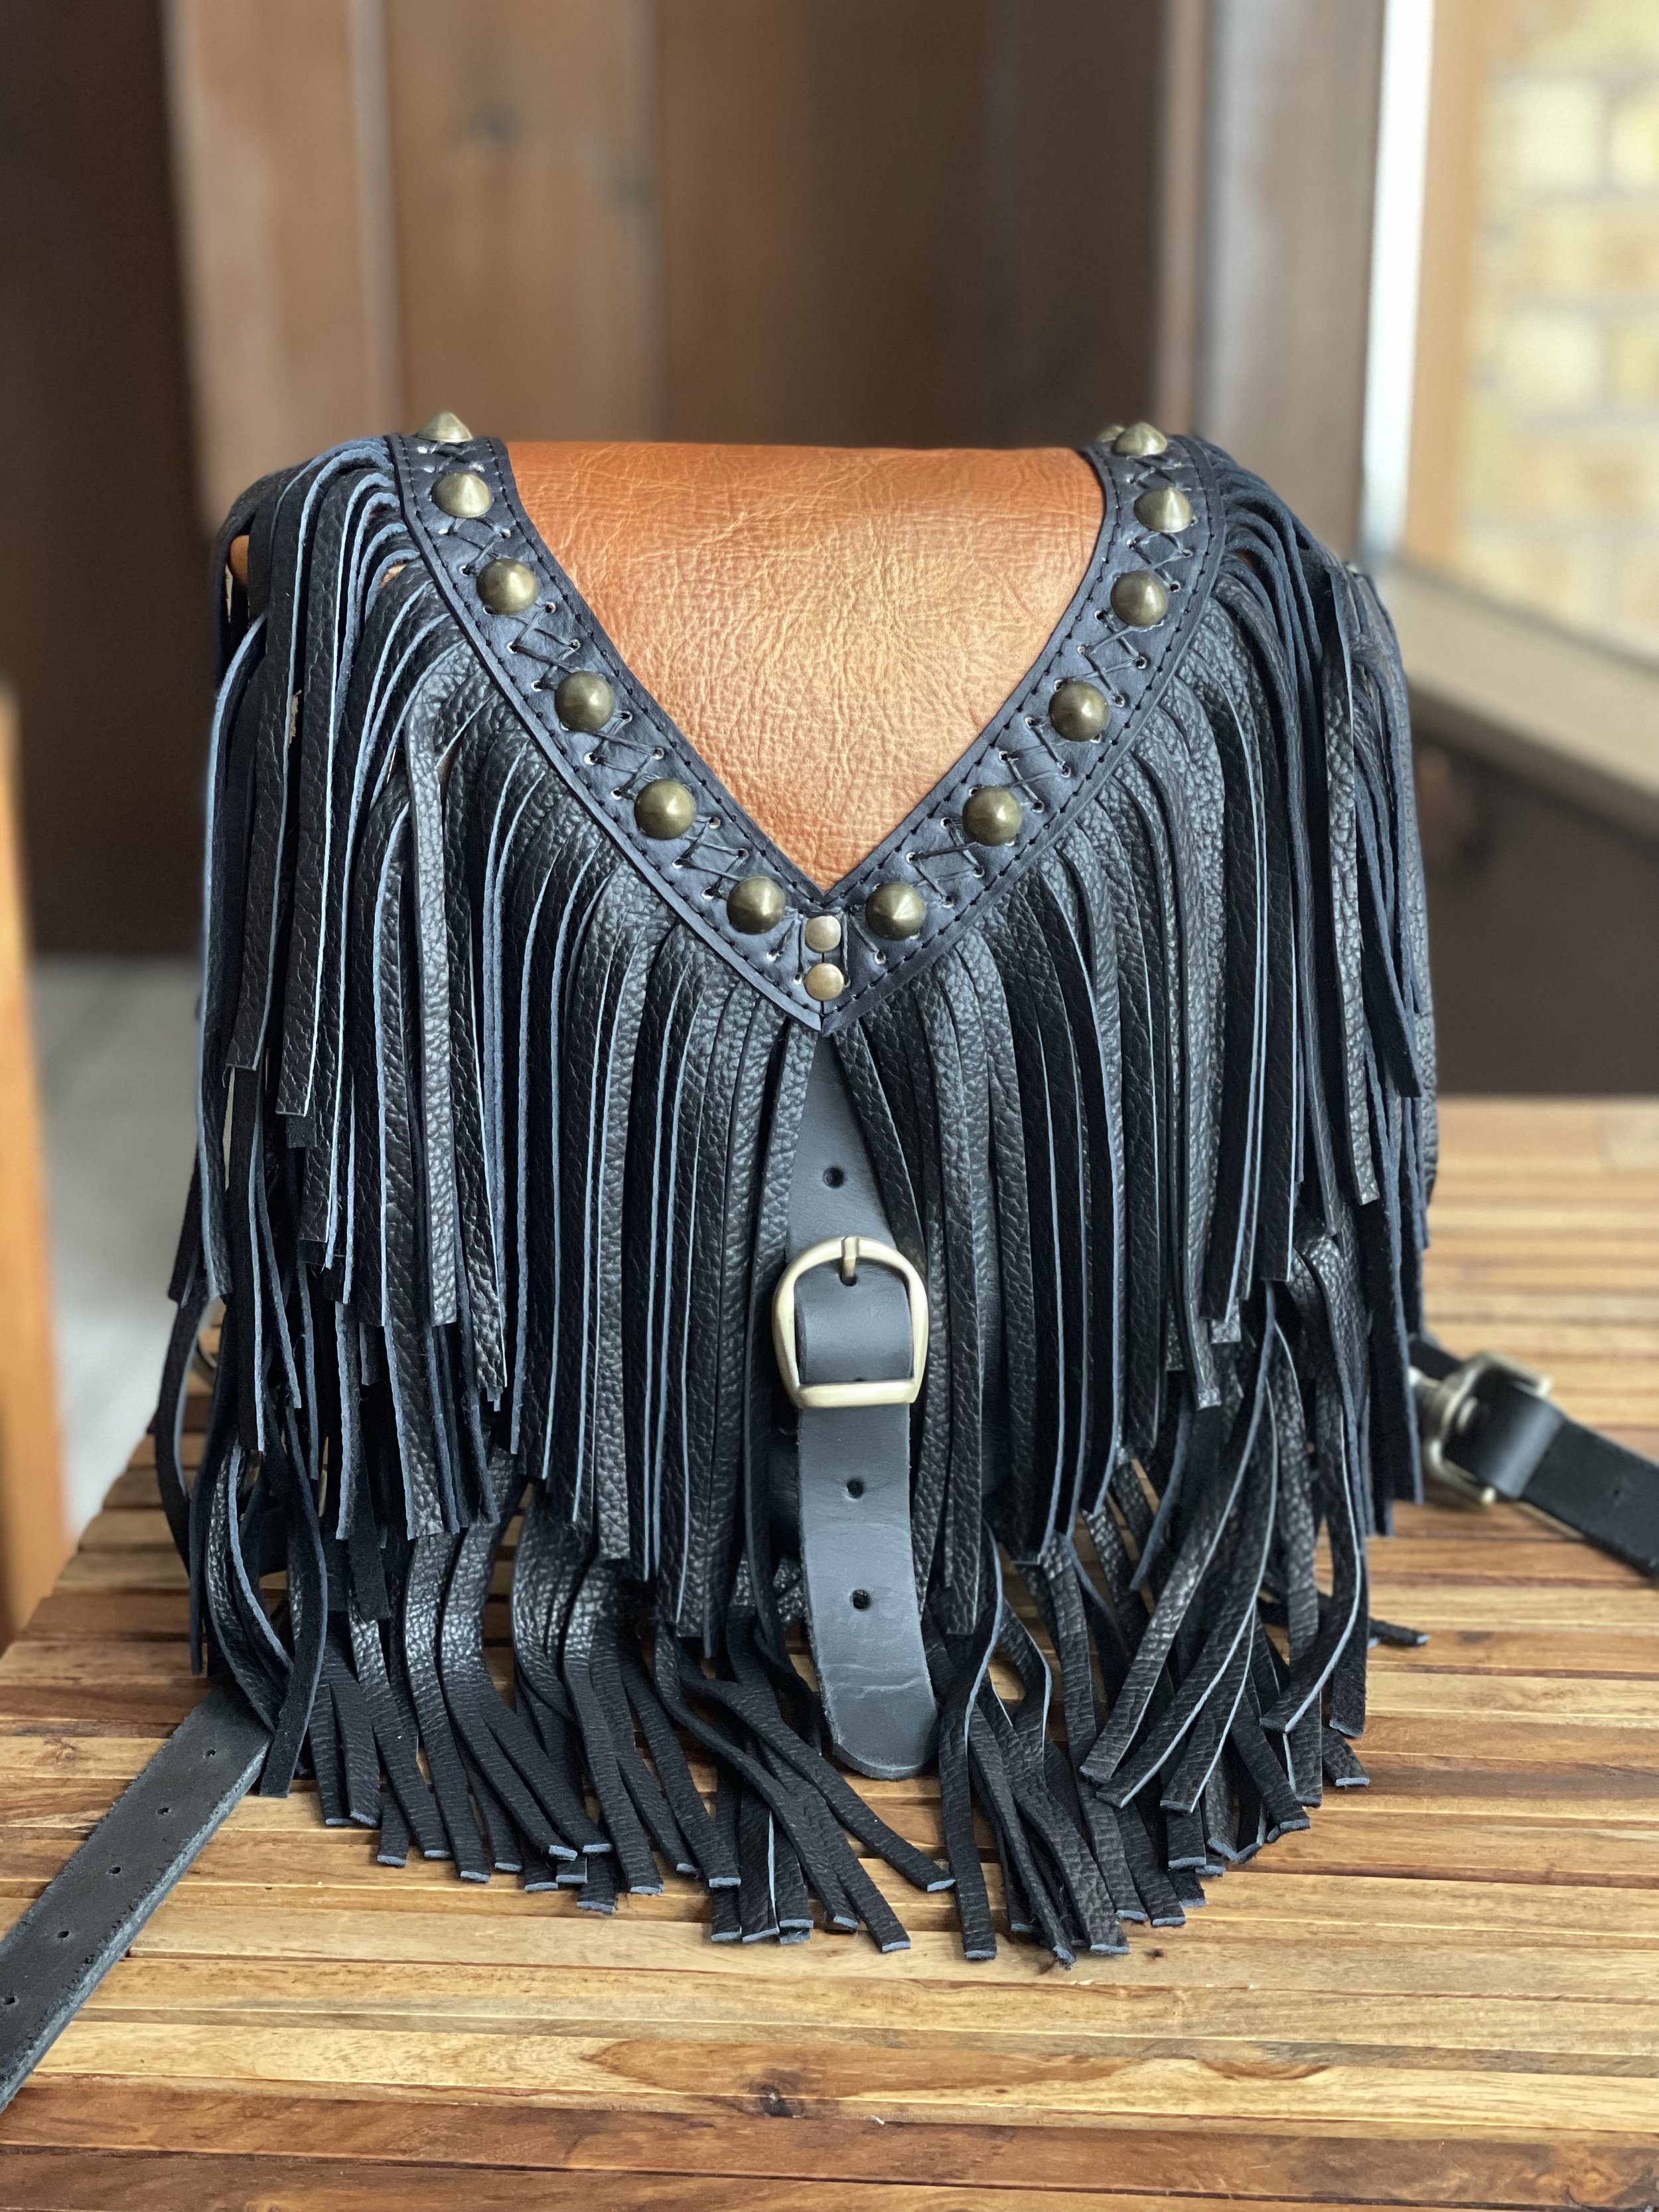 MINI BRITTANY CONVERTIBLE BACK IN HAND DYED DESERT GOLD TO COAL. CRISS CROSS HANDSTITCHING. STUDS. ANTIQUE BRASS HARDWARE. BLACK BISON LEATHER FRINGE.